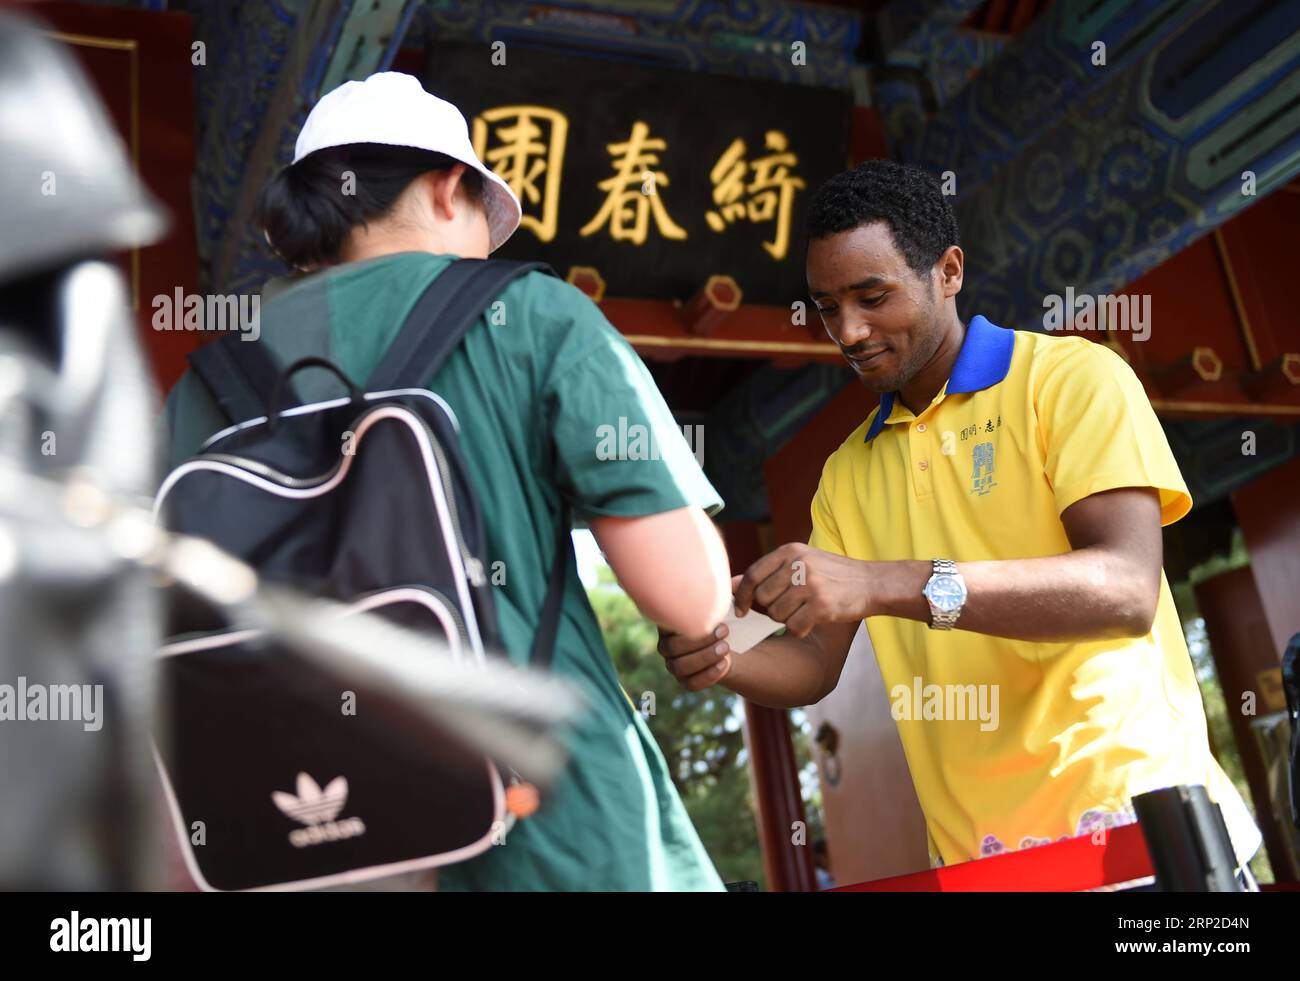 (180831) -- BEIJING, Aug. 31, 2018 -- Endale Leqesse (R), an Ethiopian student studying in China and a volunteer at Yuanmingyuan, or the Old Summer Palace, works at one of the park s entrances in Beijing, capital of China, Aug. 31, 2018. Yuanmingyuan set up its volunteer team in 2017 and has been recruiting volunteers from the public. In July 2018, about 20 overseas students from Africa joined the team to provide tourist services. ) (lmm) CHINA-BEIJING-YUANMINGYUAN PARK-AFRICAN VOLUNTEERS (CN) LuoxXiaoguang PUBLICATIONxNOTxINxCHN Stock Photo